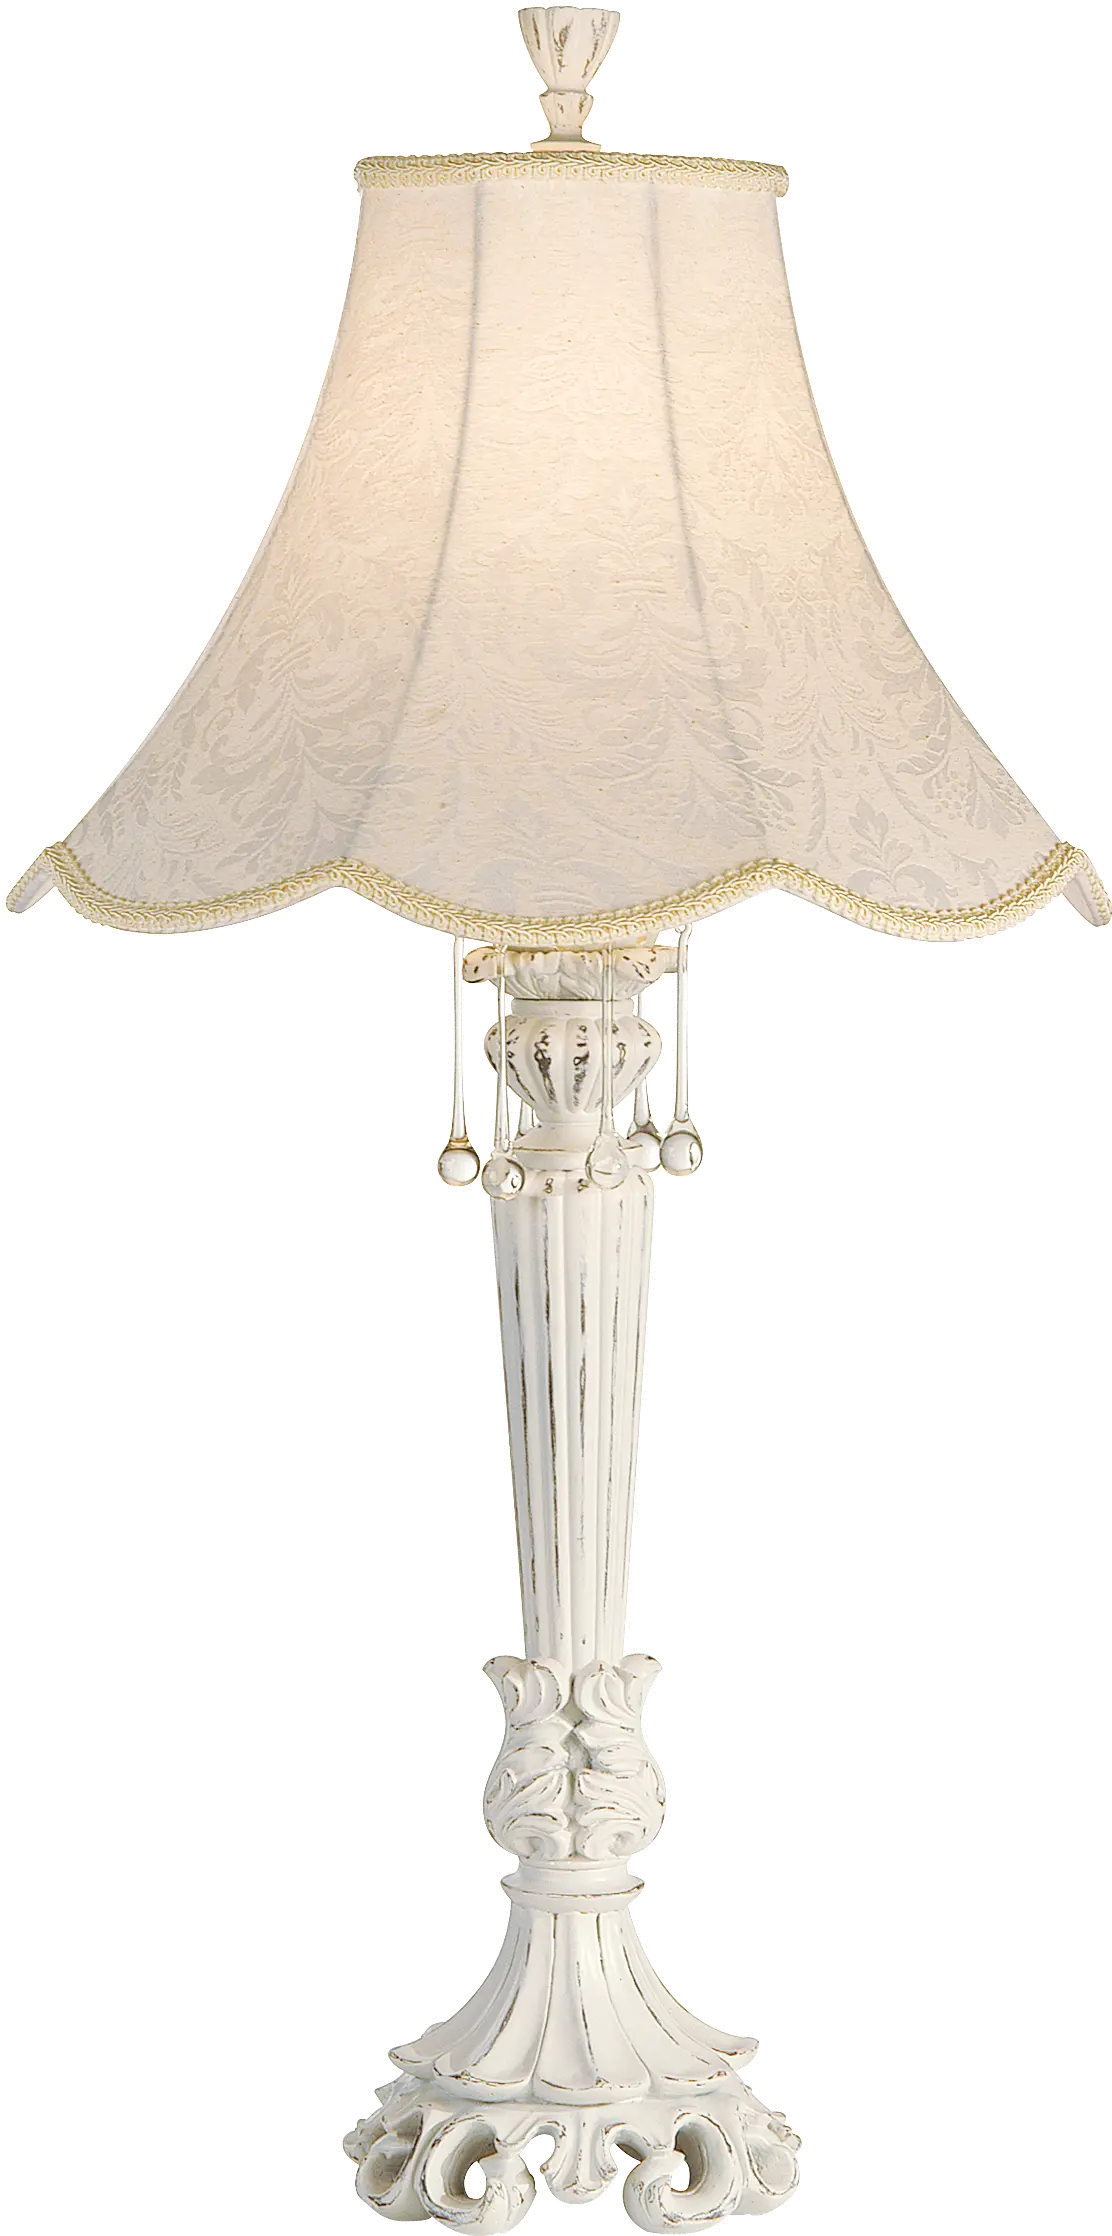 87-232-7W Distressed White Traditional Table Lamp sku 87-232-7W